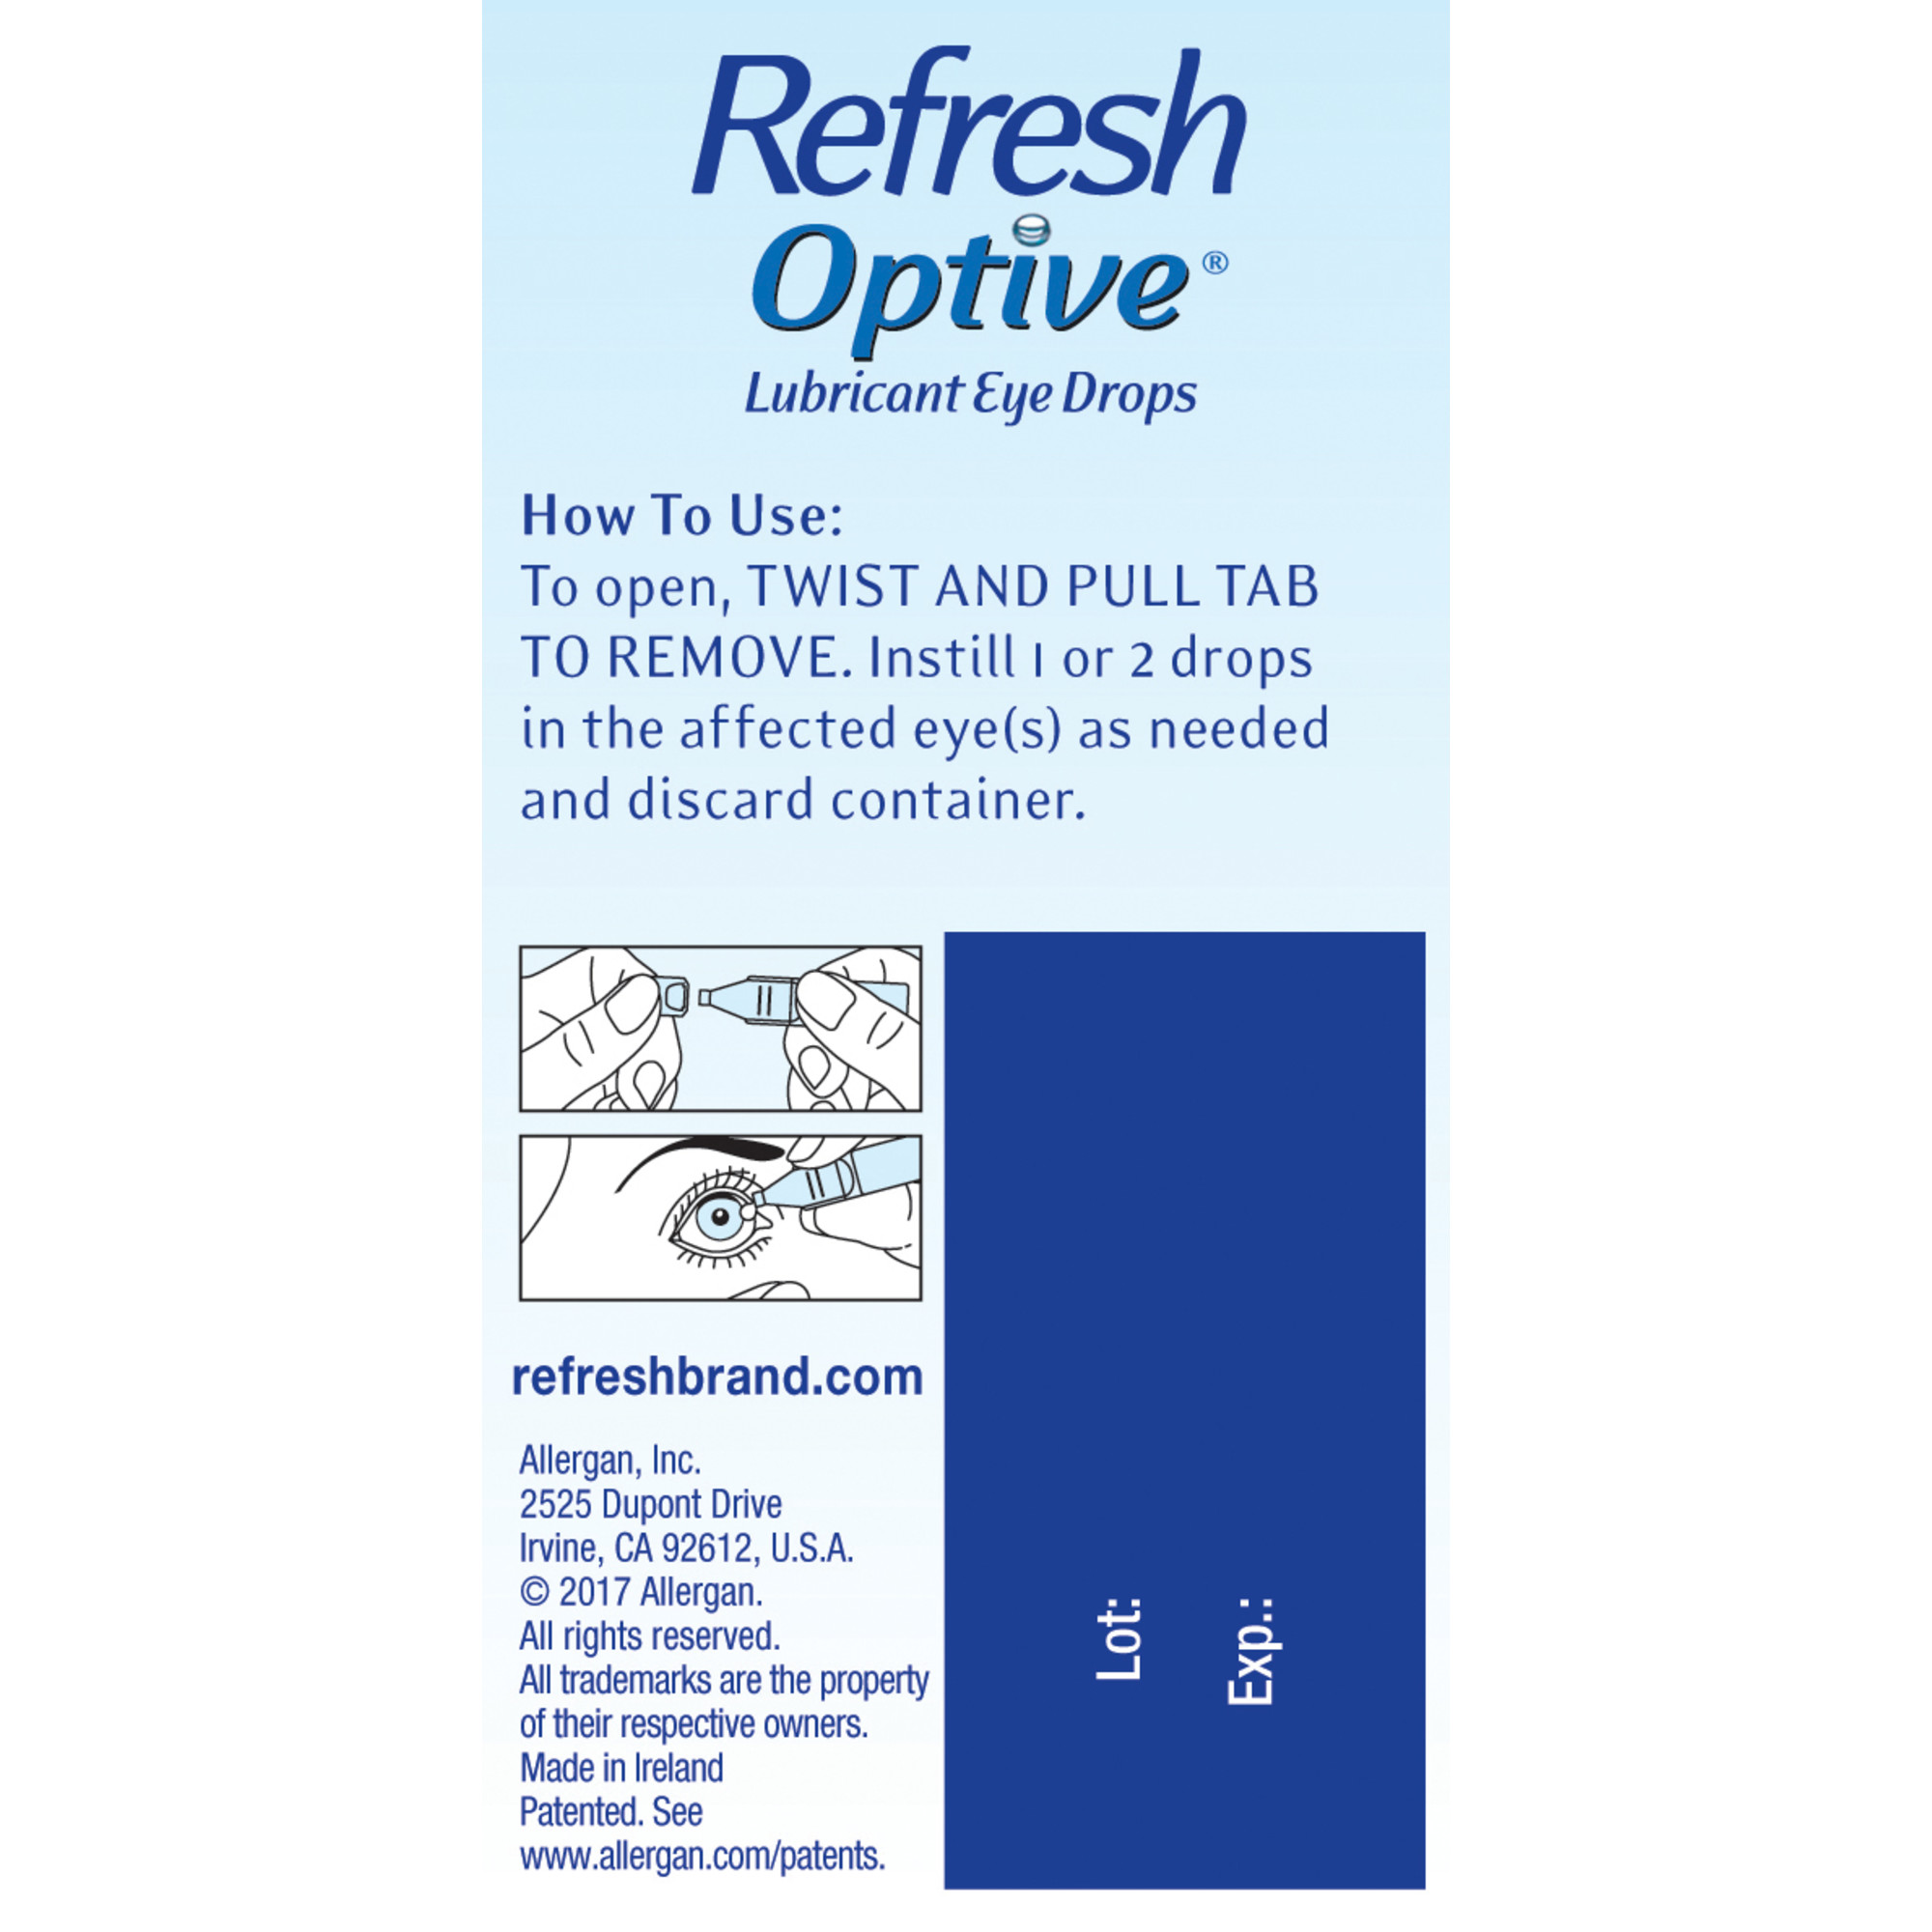 Refresh Optive Lubricant Eye Drops Preservative-Free Tears, 0.4 ml, 30 Count - image 11 of 15